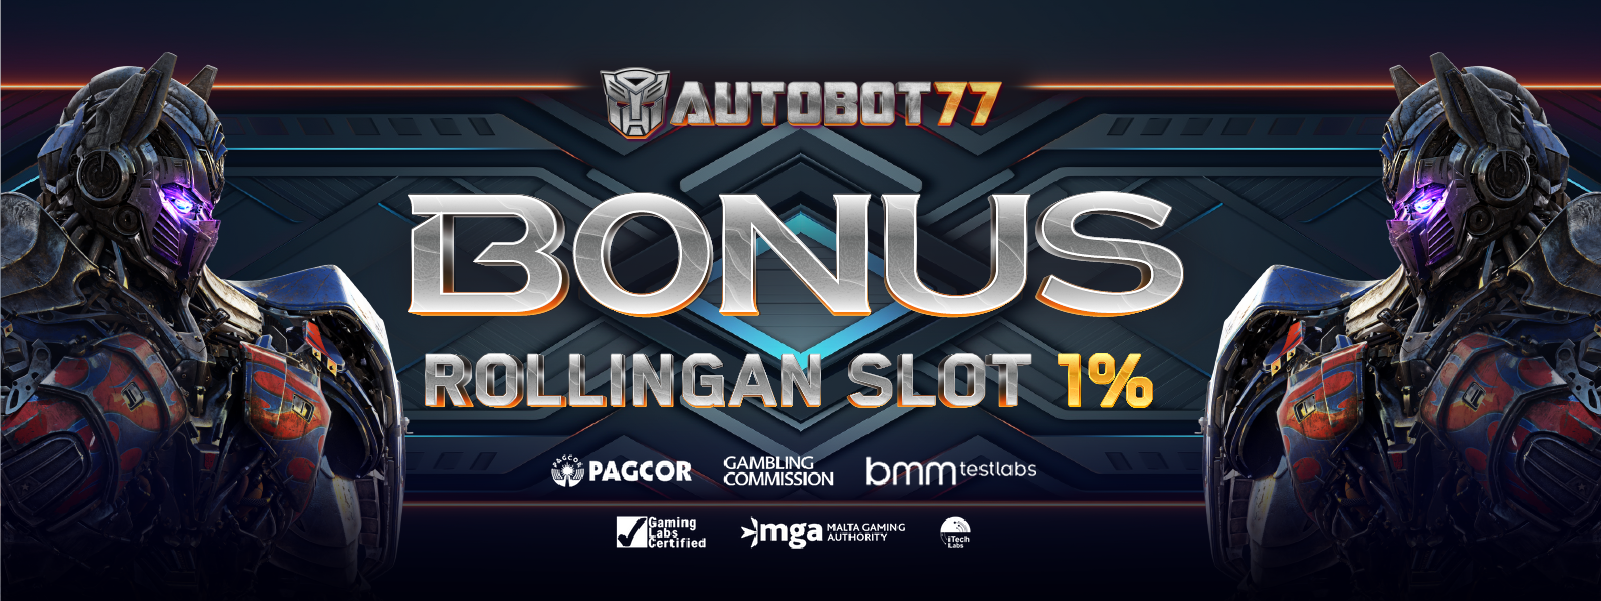 AUTOBOT77 virtual games which was founded in Indonesia